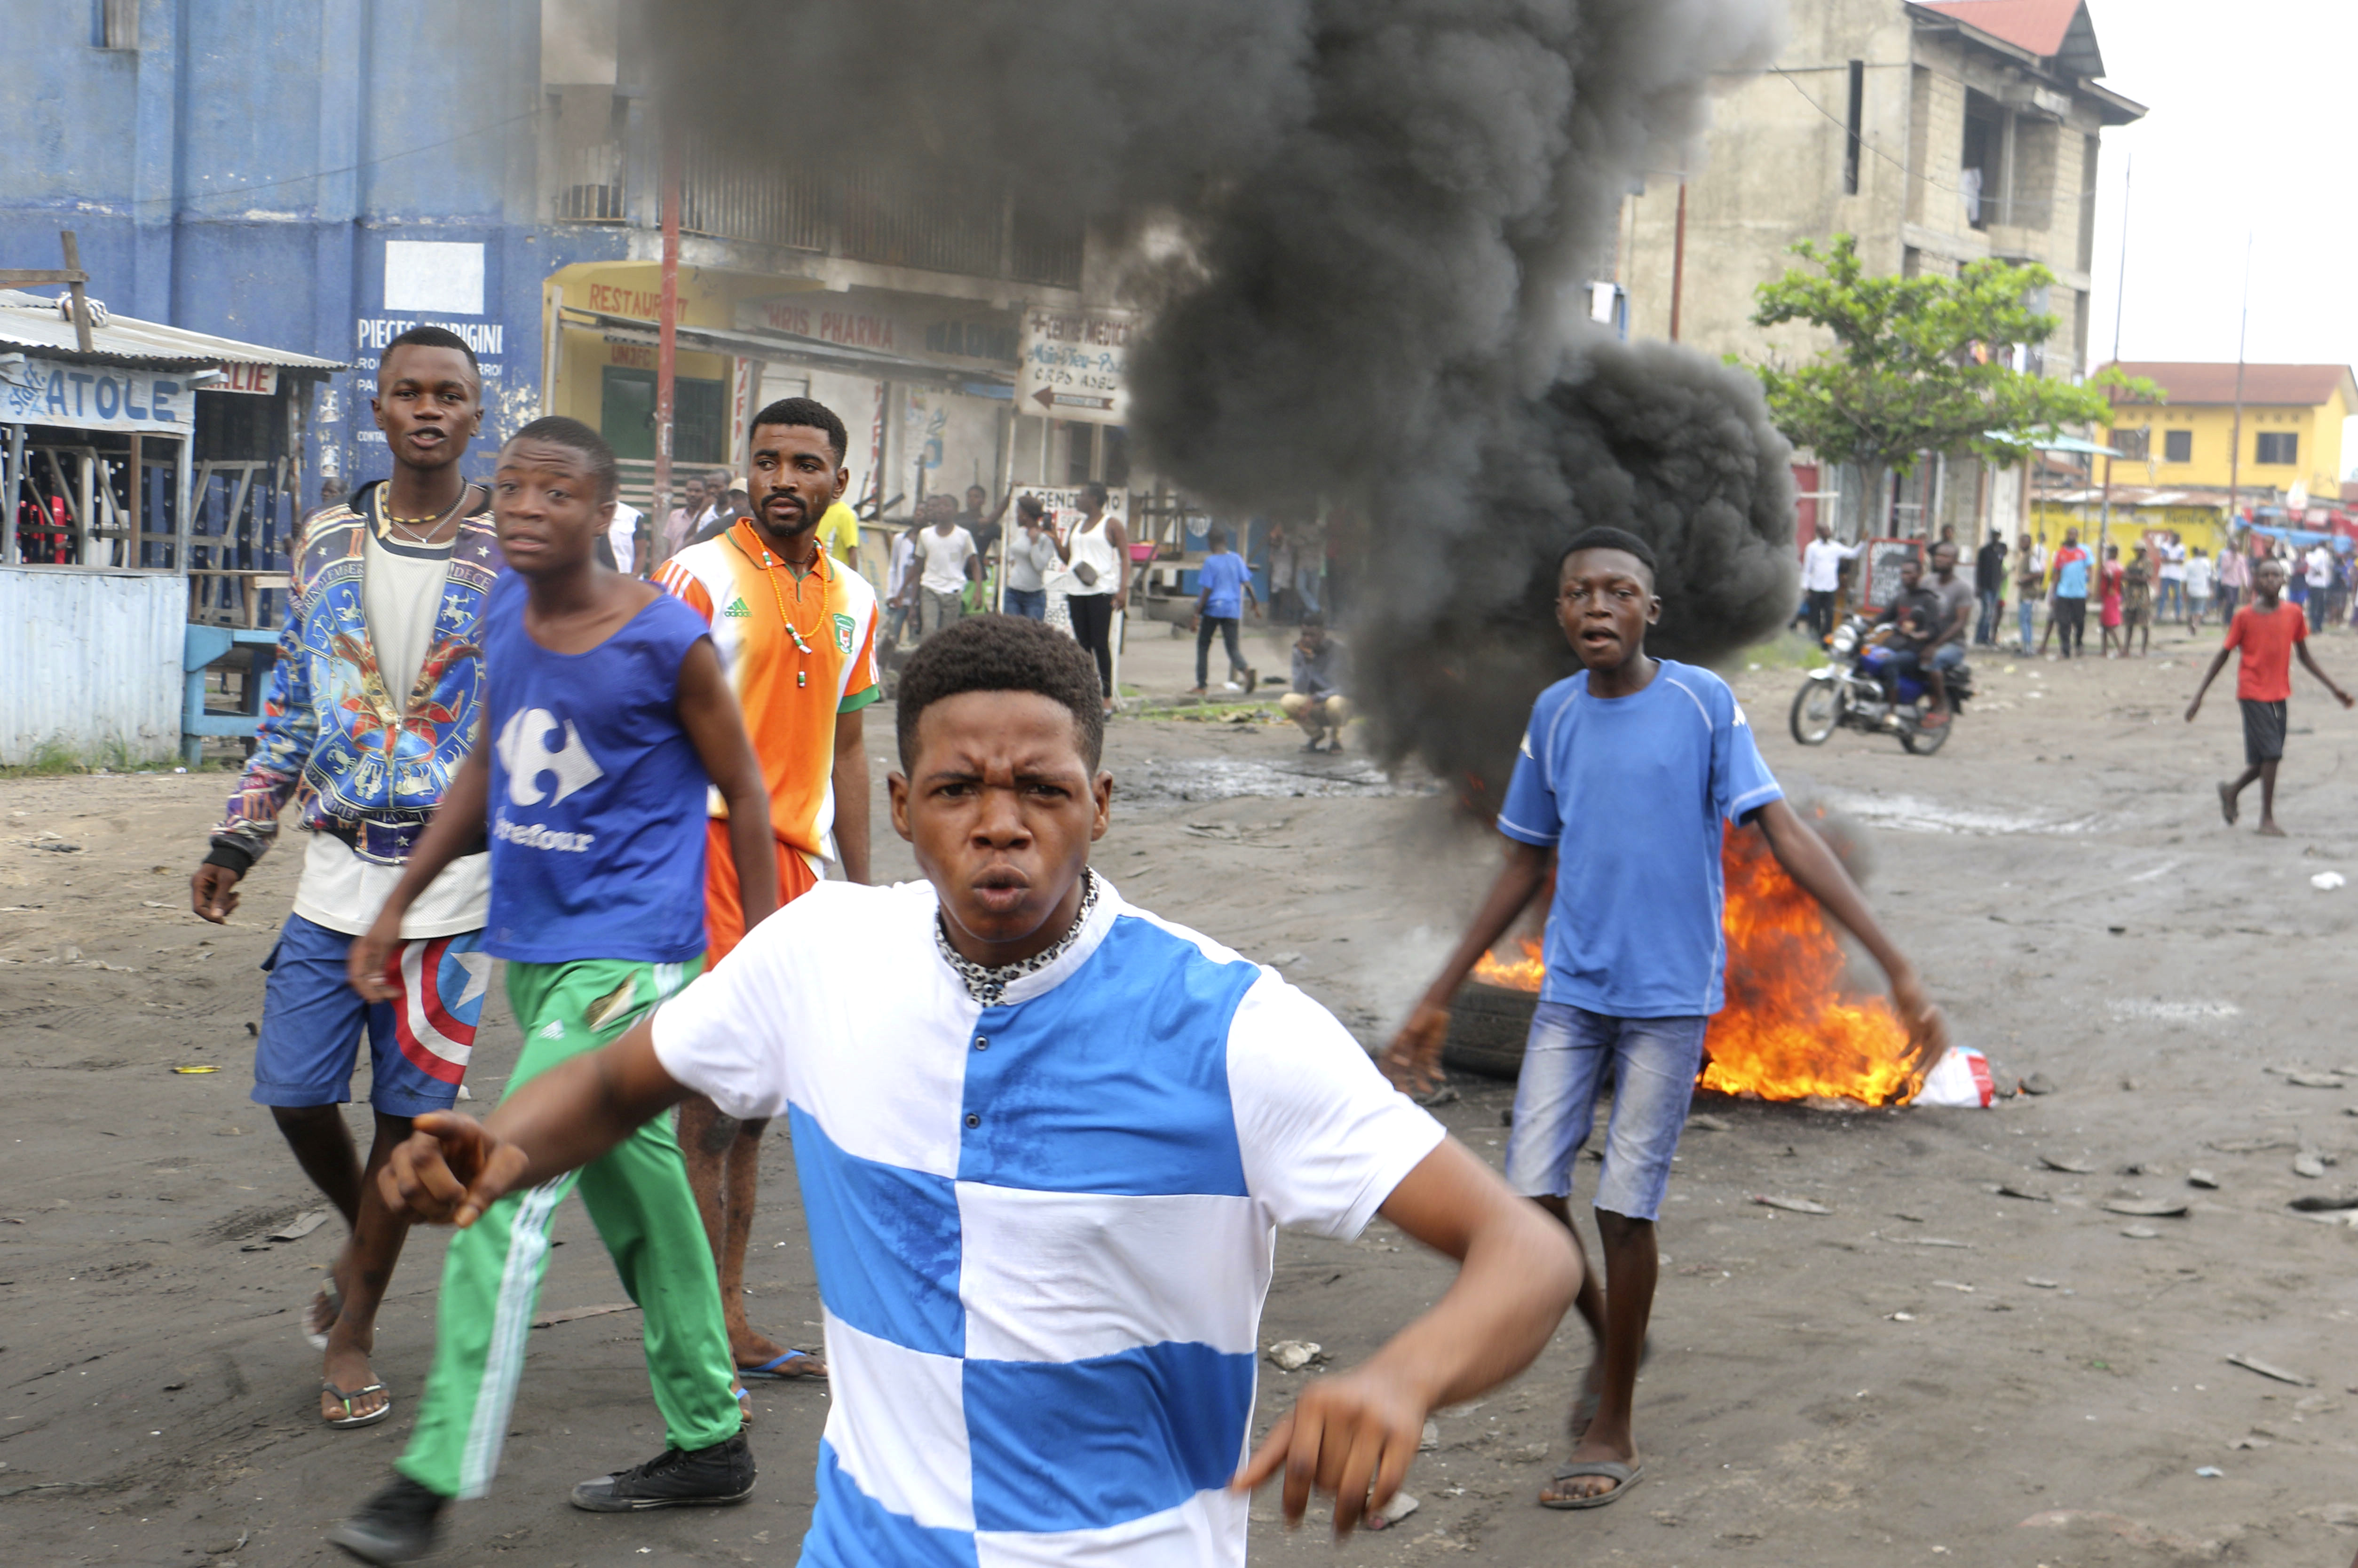 Congolese boys take part in a protest against President Joseph Kabila's refusal to step down from power in Kinshasa, Democratic Republic of Congo, Sunday, Dec. 31, 2017. Congolese security forces shot dead two men outside a church on Sunday while dispersing demonstrators protesting in the country's capital against President Joseph Kabila's refusal to step down from power, according to Human Rights Watch. (AP Photo/John Bompengo)